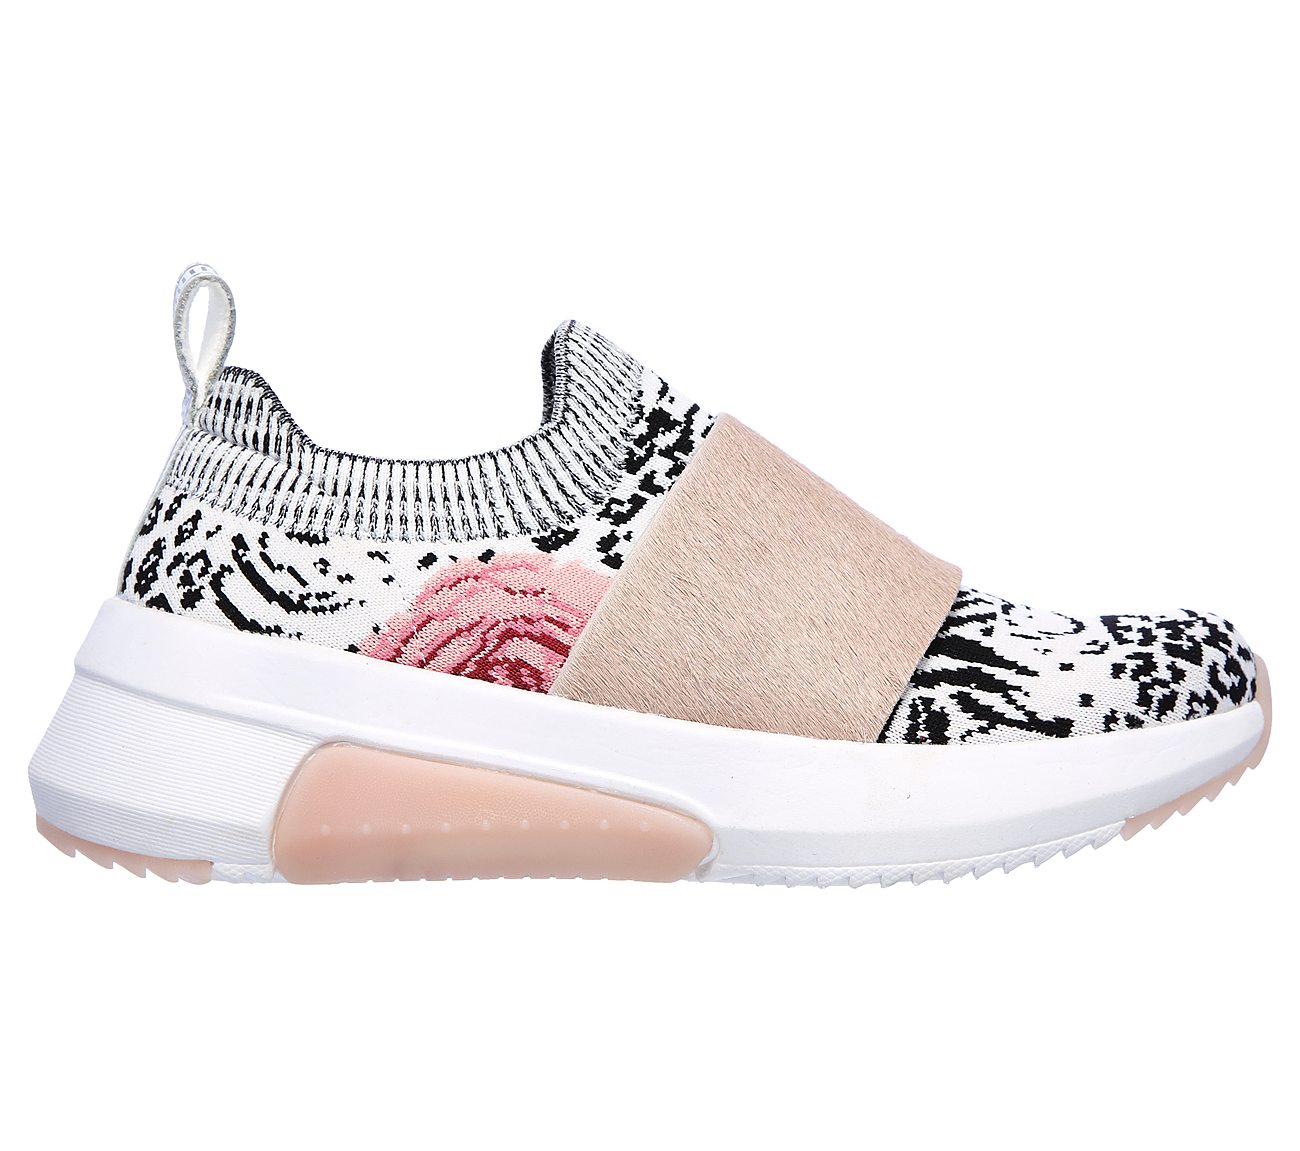 MODERN JOGGER 2.0 - SANCTUARY, WHITE/PINK Footwear Right View